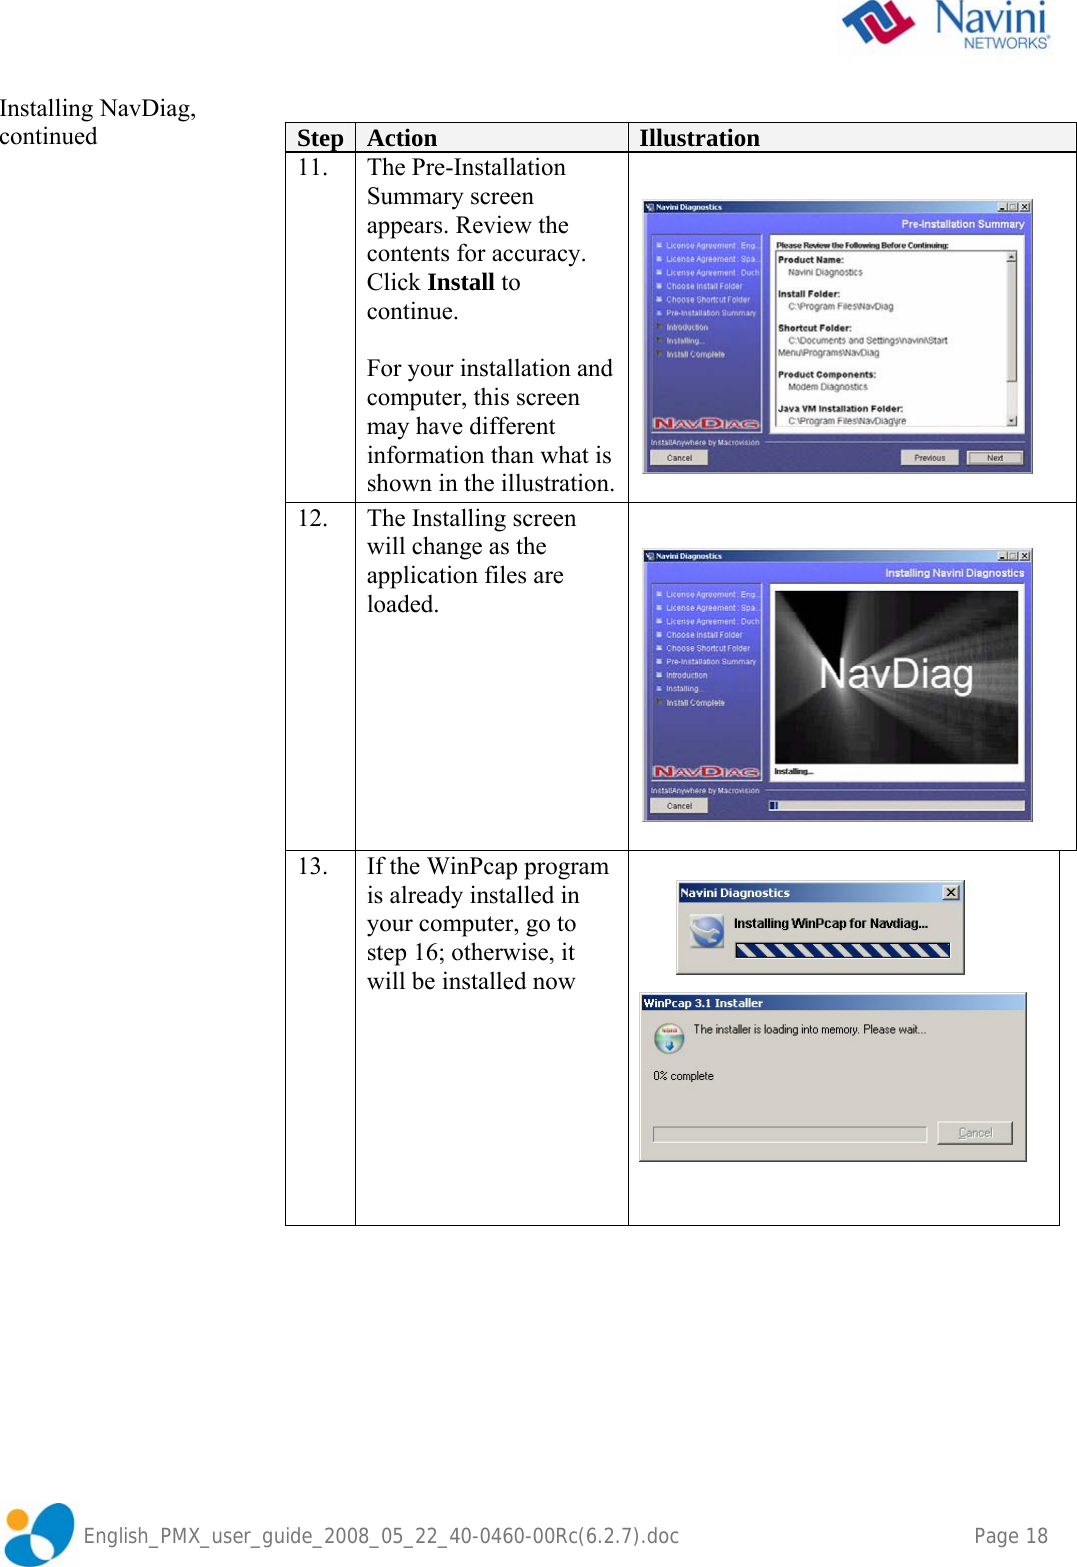               English_PMX_user_guide_2008_05_22_40-0460-00Rc(6.2.7).doc    Page 18 Installing NavDiag, continued    Step  Action  Illustration 11. The Pre-Installation Summary screen appears. Review the contents for accuracy. Click Install to continue.  For your installation and computer, this screen may have different information than what is shown in the illustration.  12.  The Installing screen will change as the application files are loaded.          13.  If the WinPcap program is already installed in your computer, go to step 16; otherwise, it will be installed now                